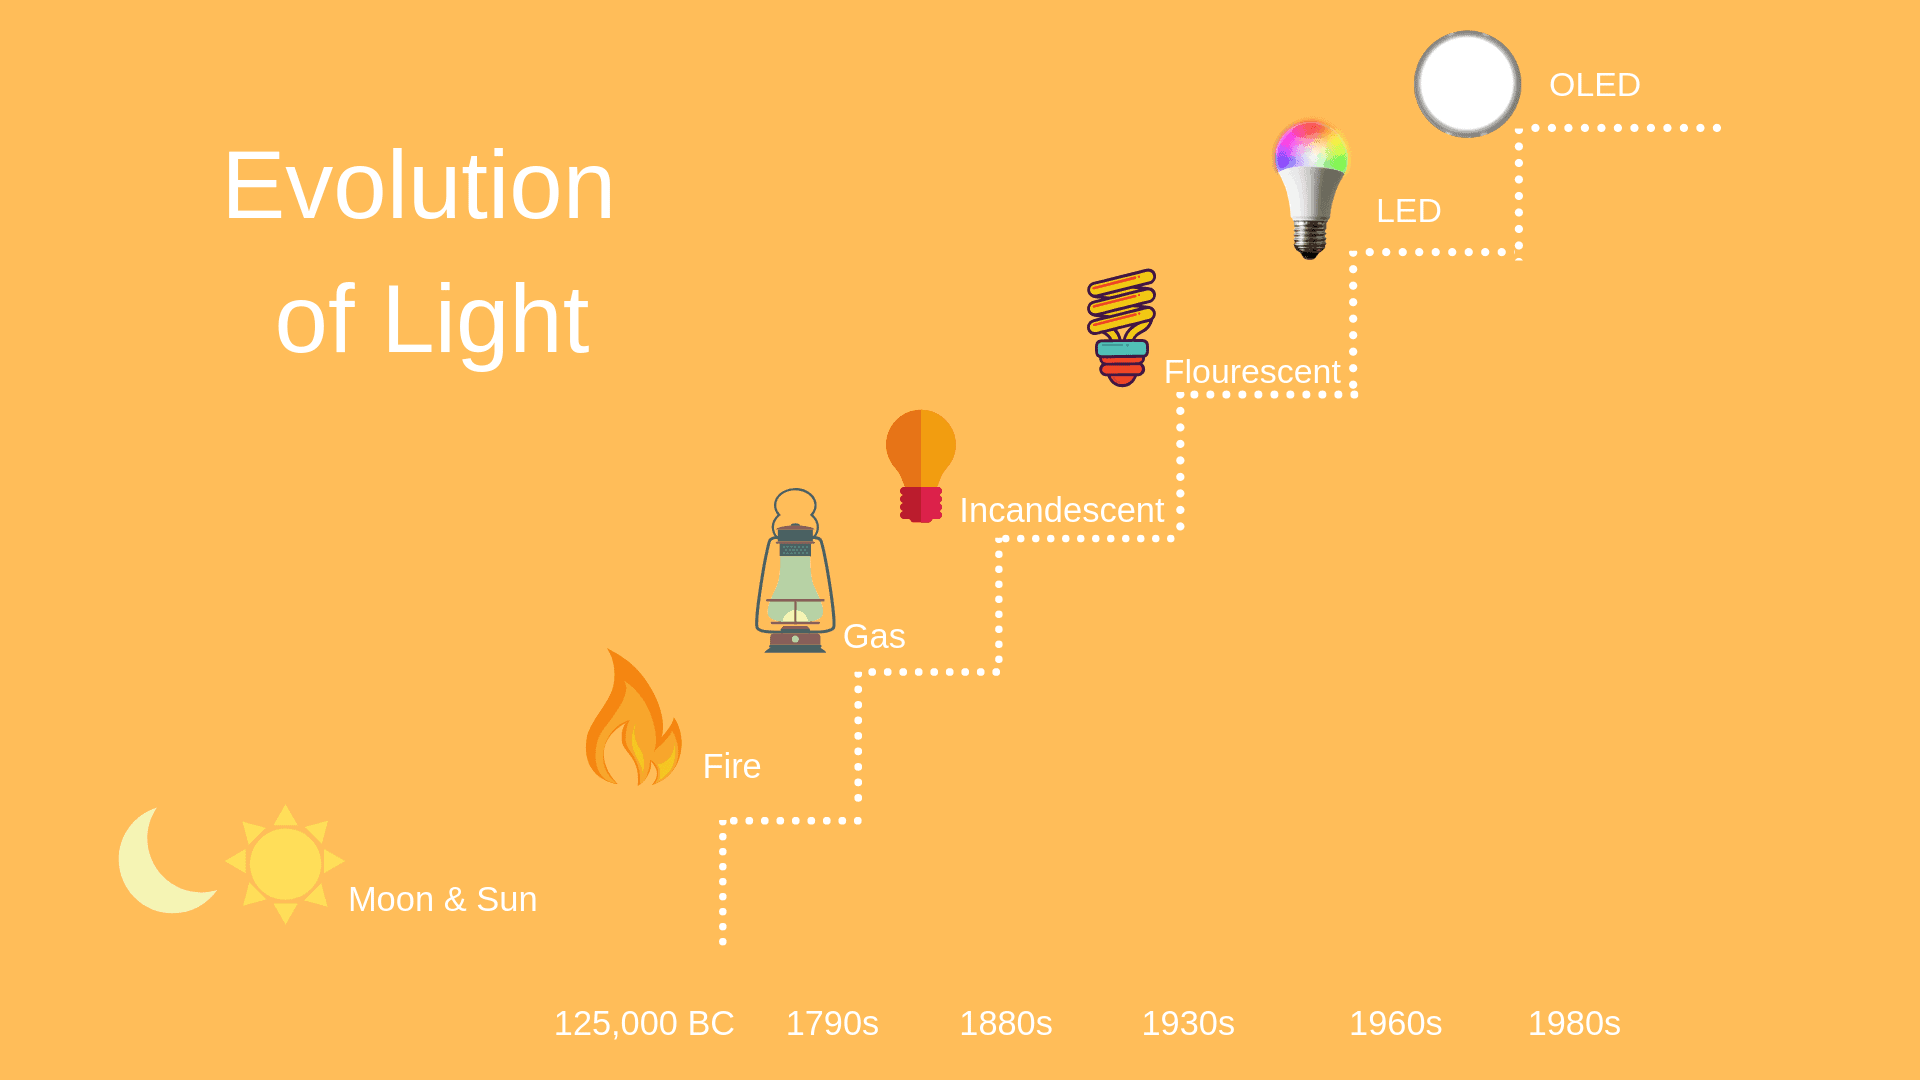 Graphic of the evolution of light from fire to OLED